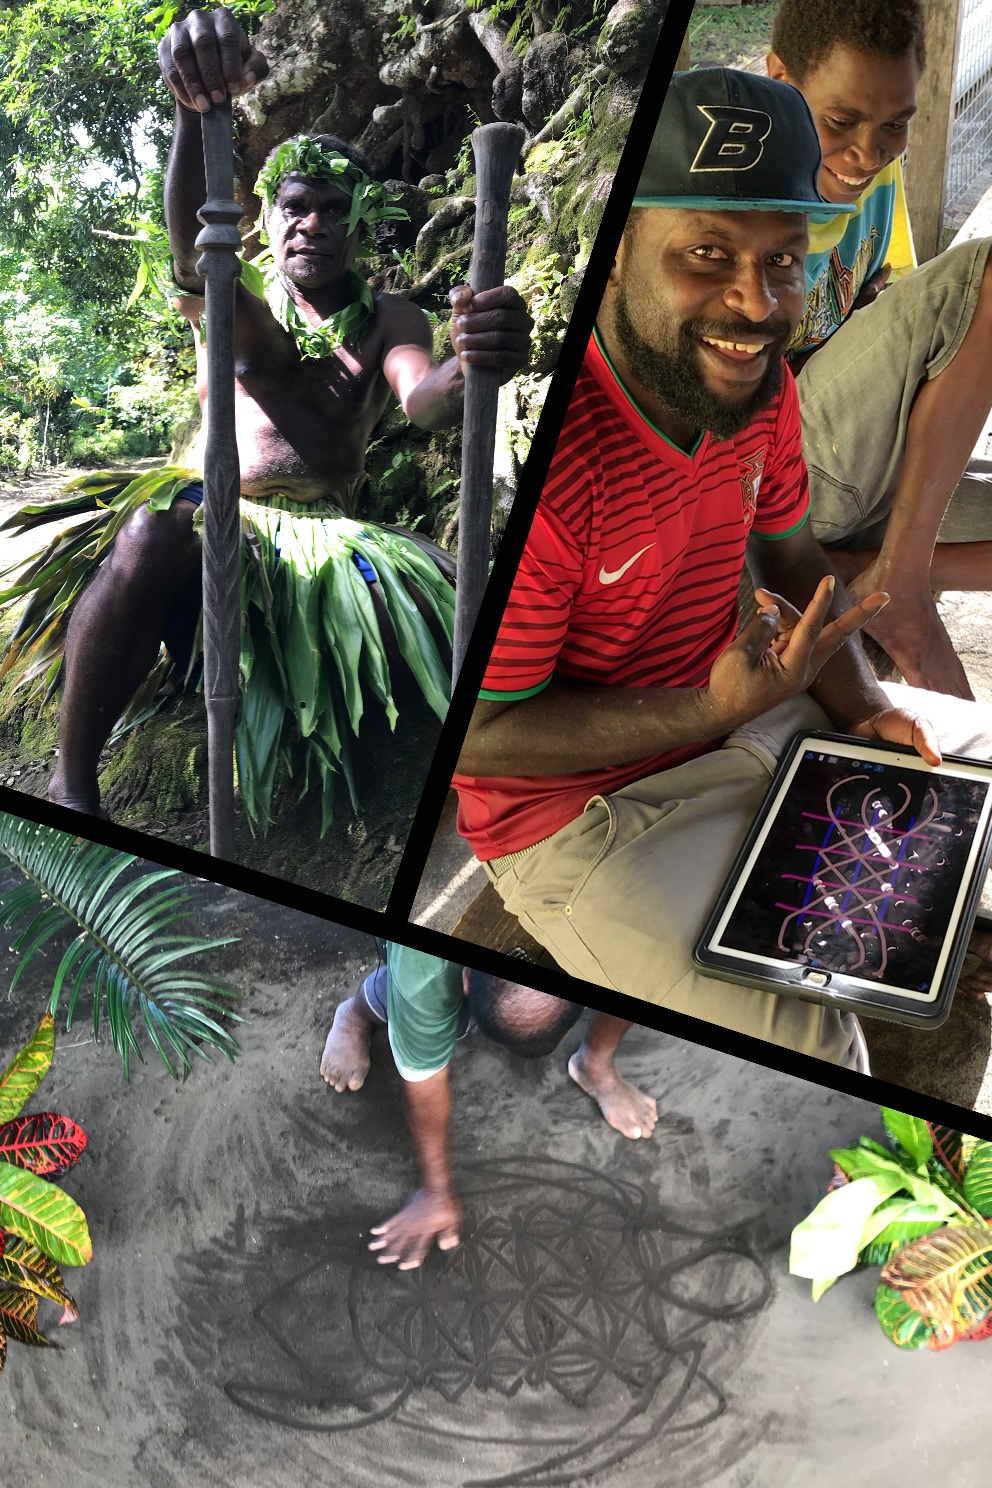 Landing page image for the collection "Black sand stories: a polysemiotic and multimodal documentation of Paamese sand stories, a critically endangered tradition of Vanuatu"